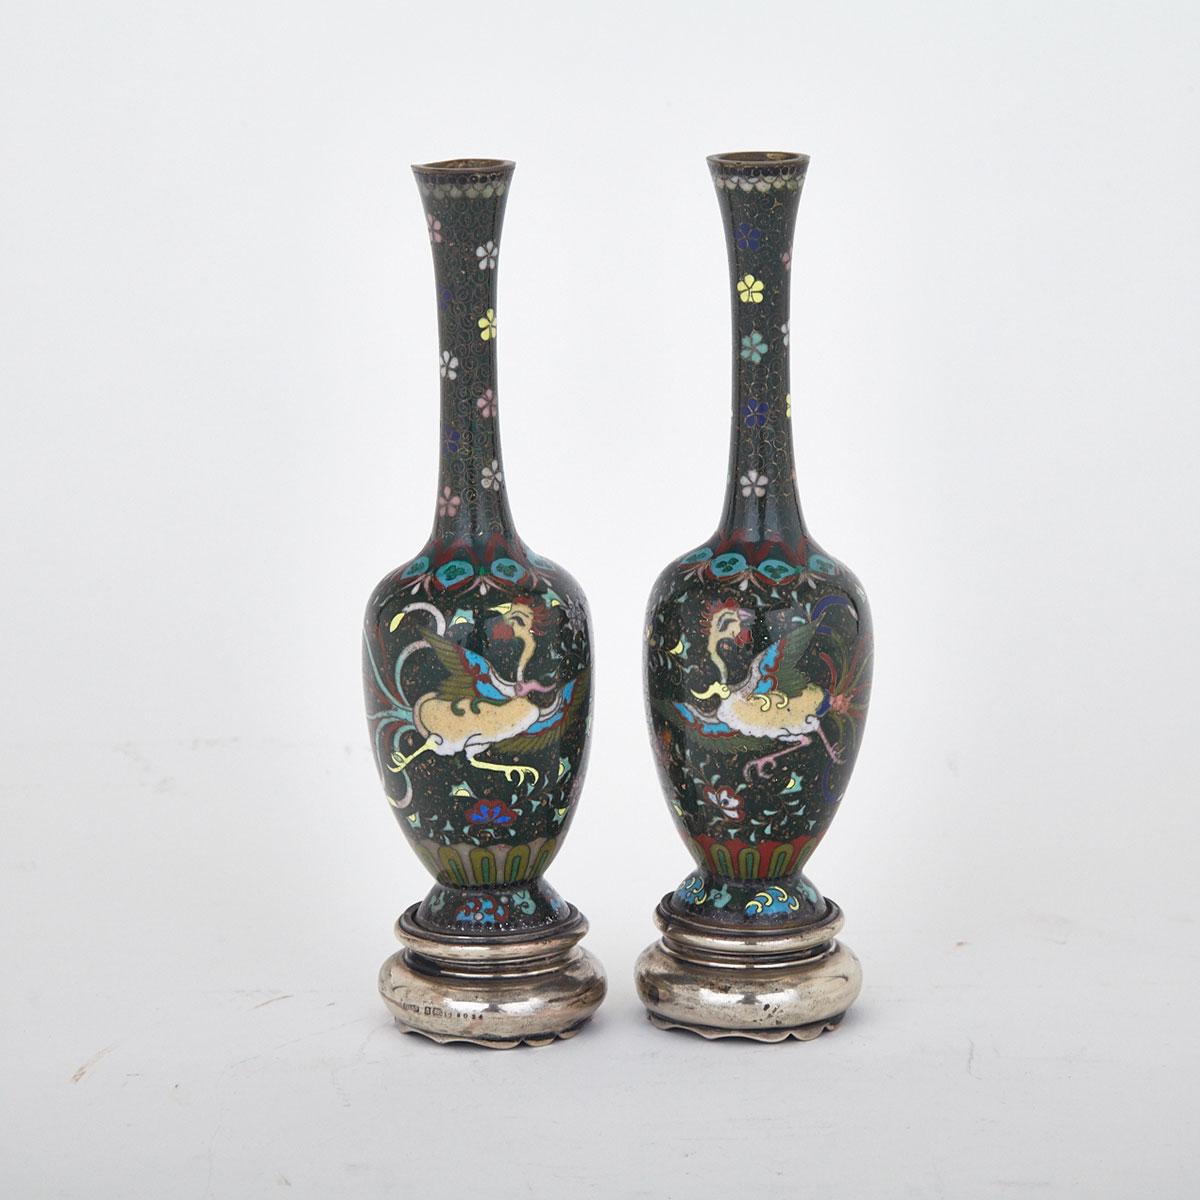 Pair of Goldstone Inlay and Silver Mounted Cloisonné Enamel Bottle Vases, Japan, Early 20th Century